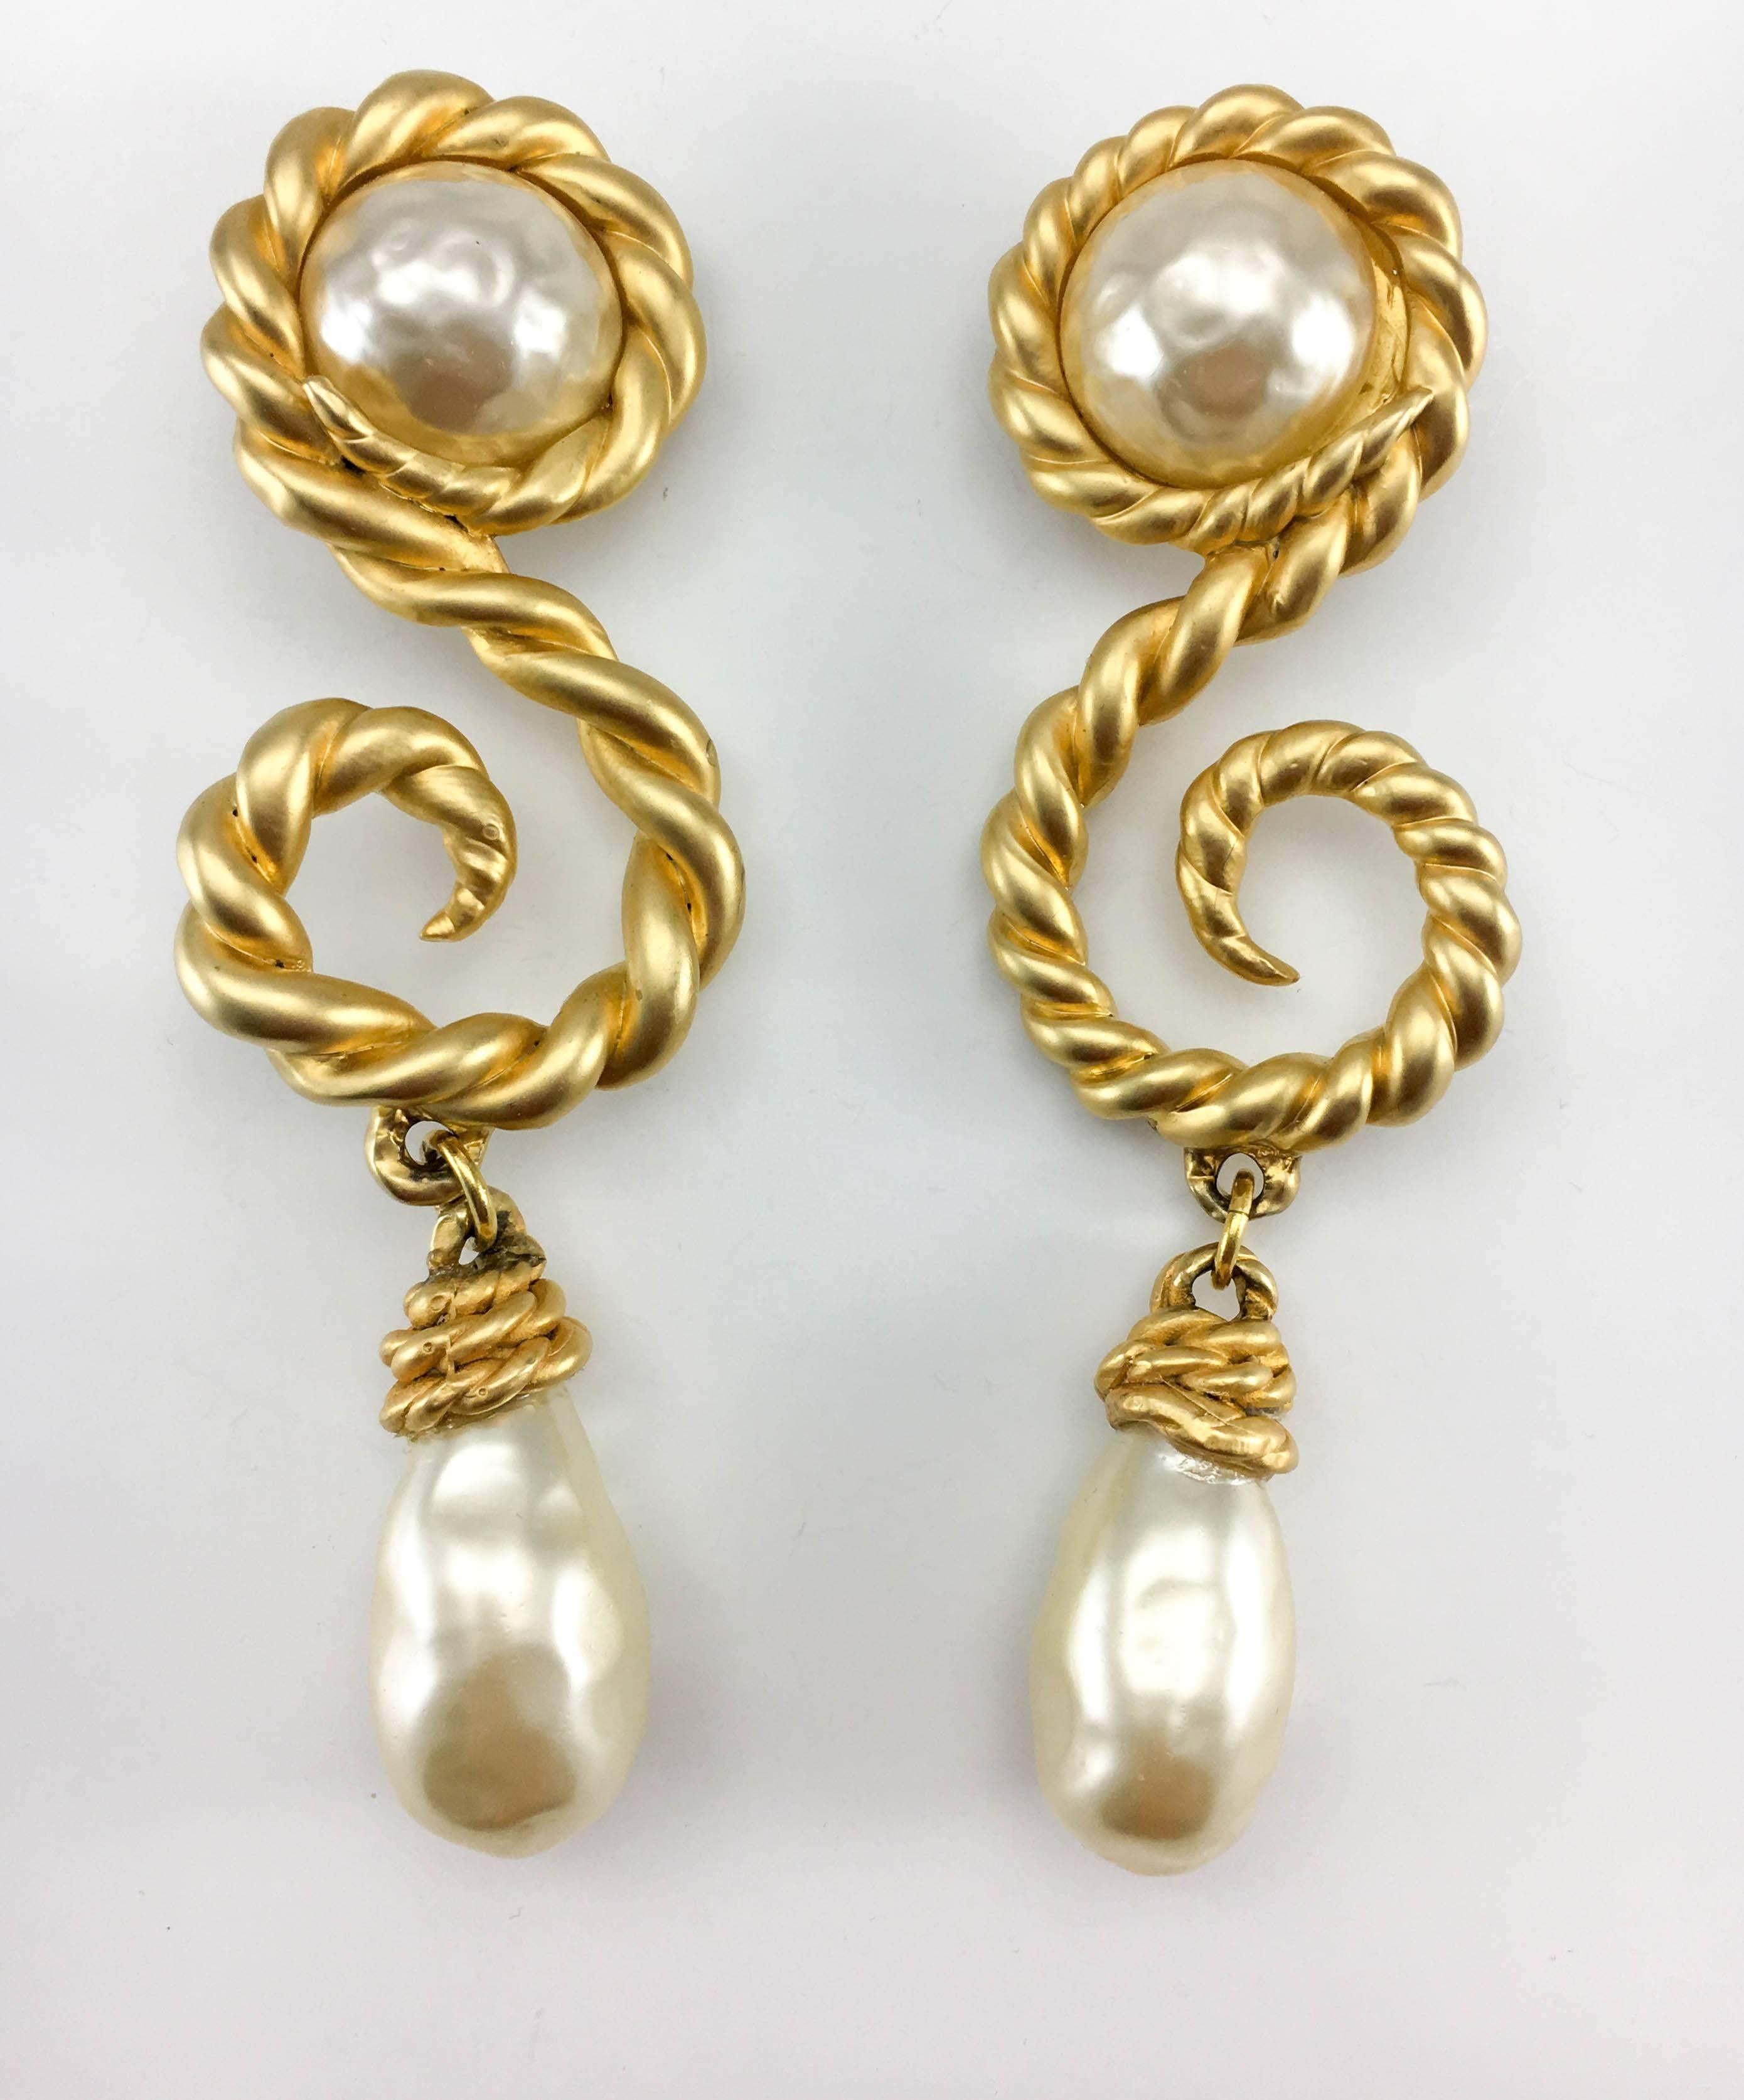 Chanel 1990 Runway Look Massive Arabesque and Baroque Pearl Earrings In Excellent Condition In London, Chelsea